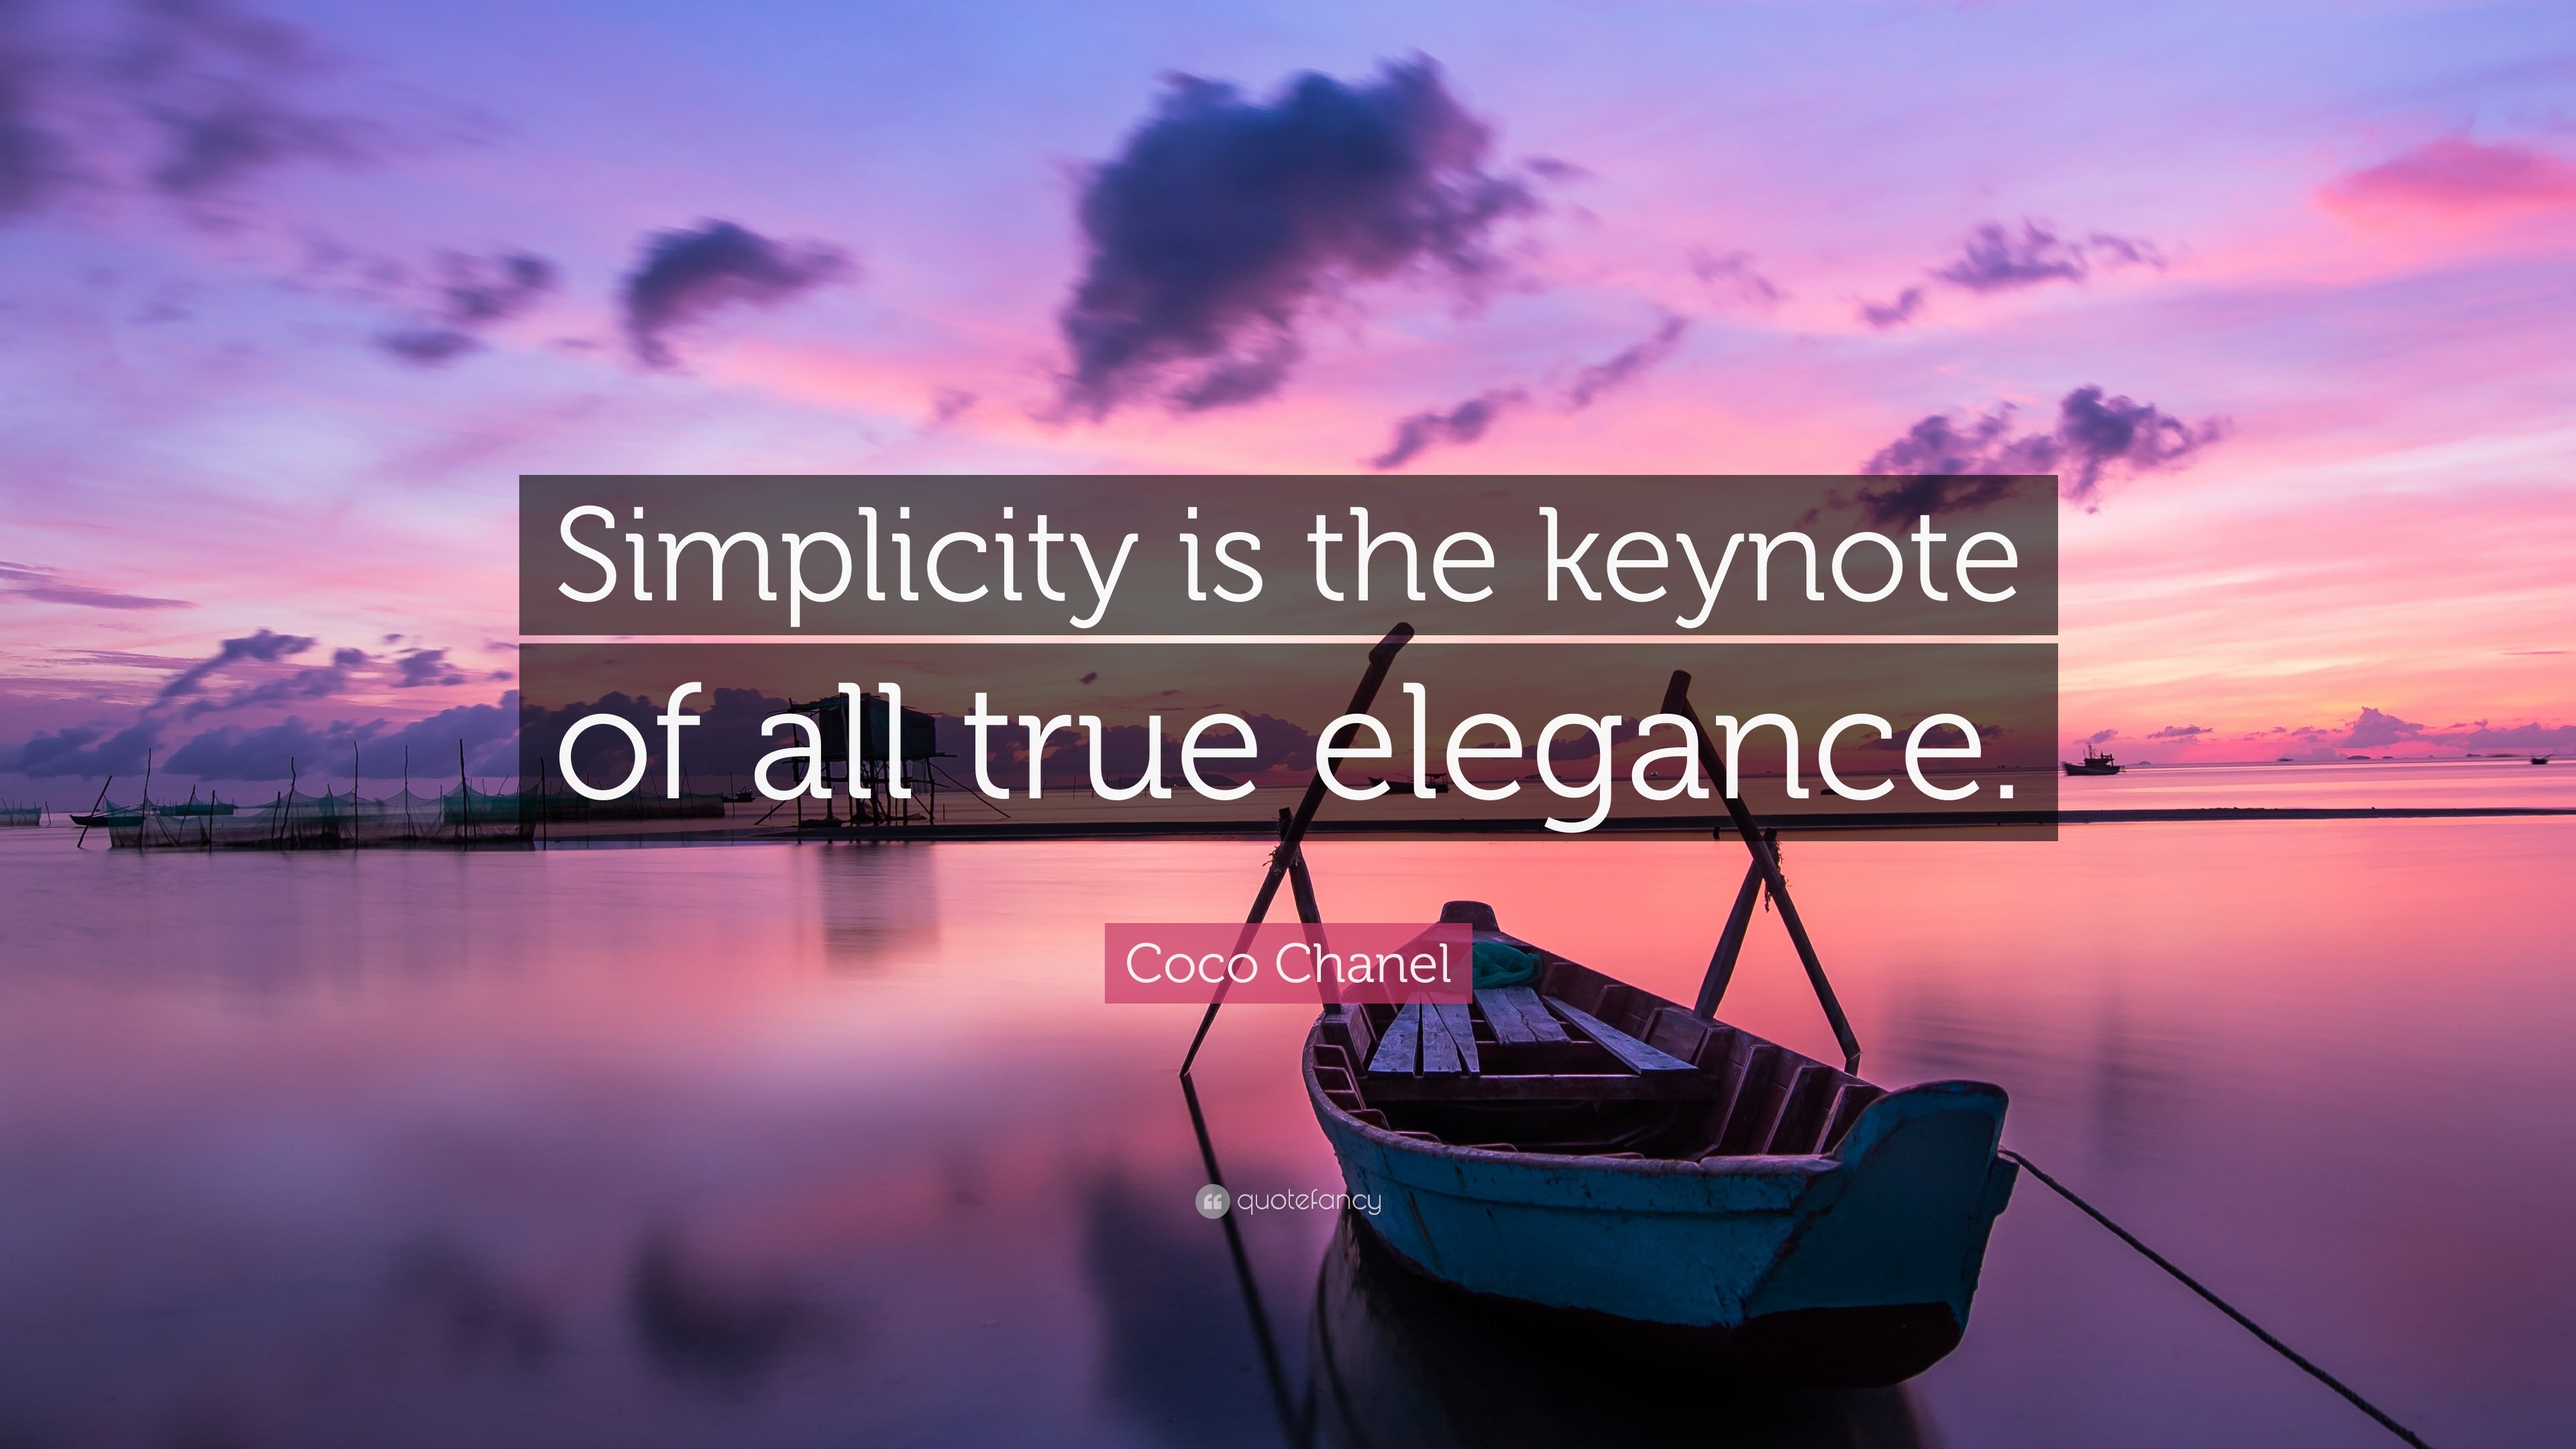 Coco Chanel Quote: "Simplicity is the keynote of all true ...